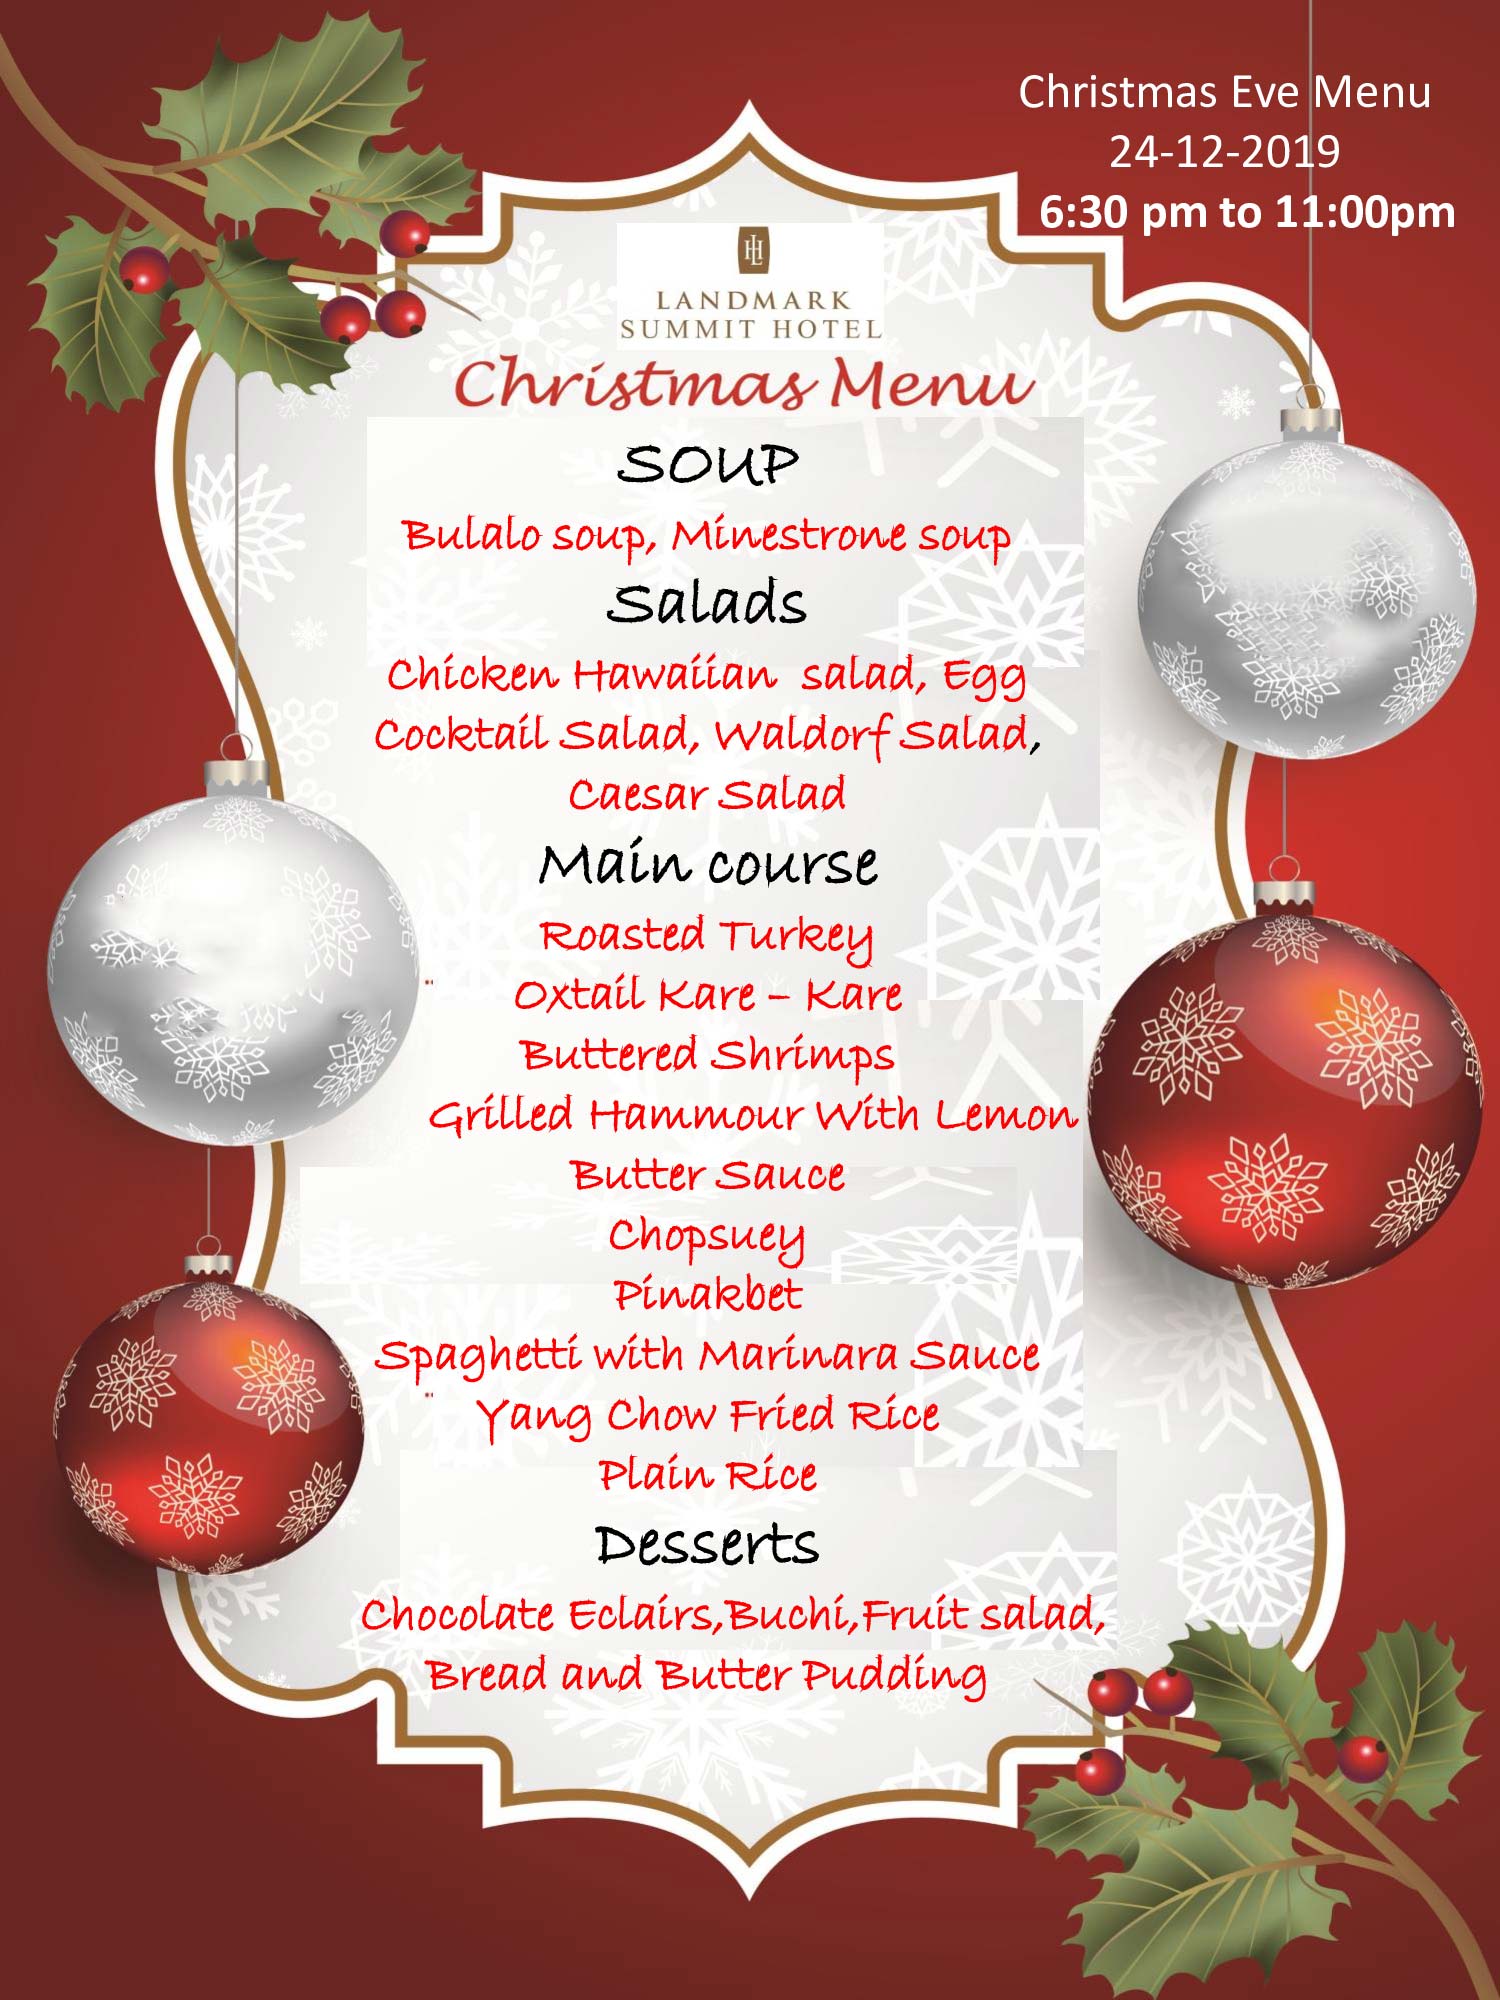 Christmas Eve Dinner Deals and Offers at Landmark Summit Hotel | Cobone ...